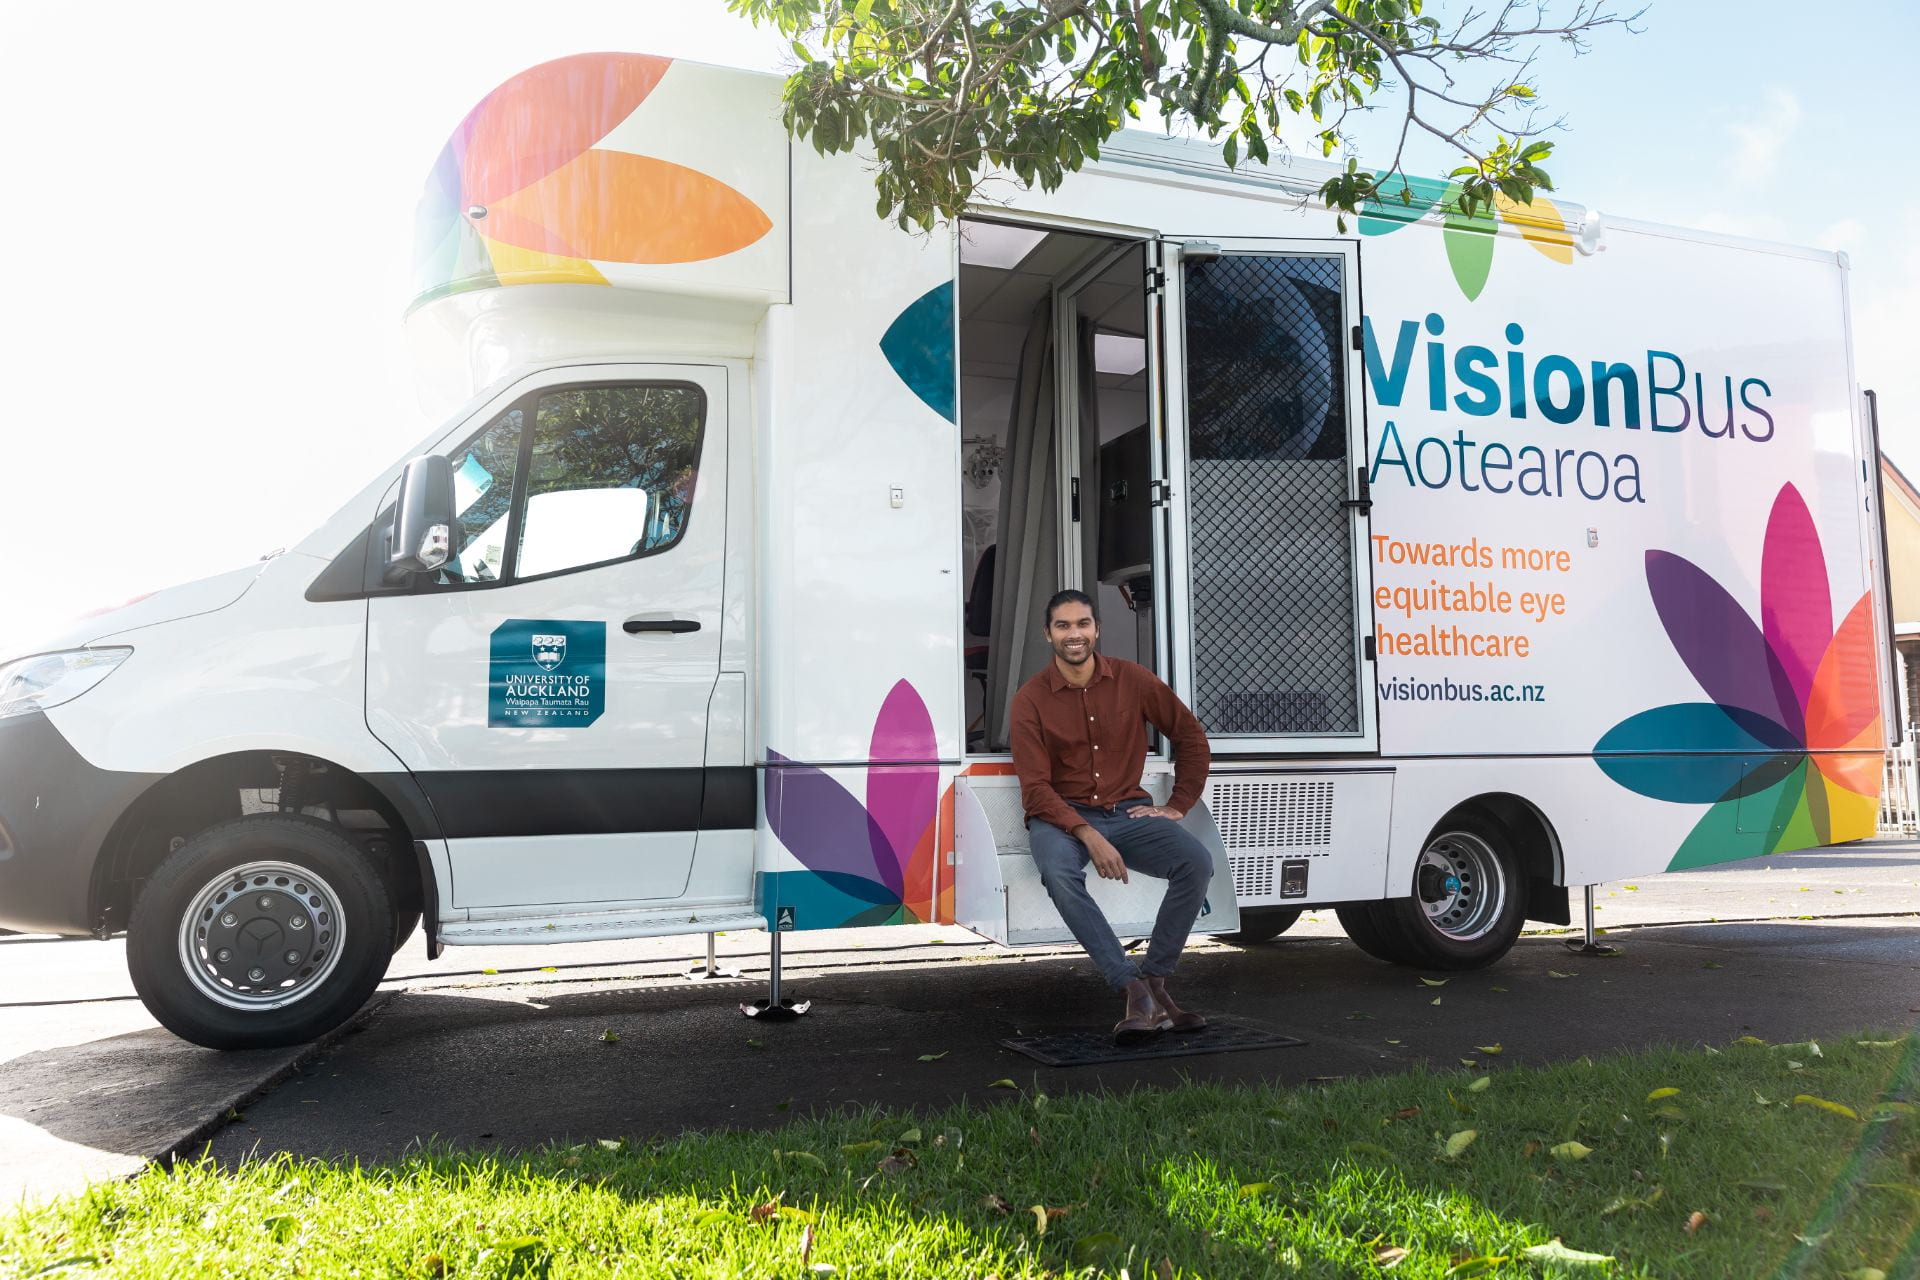 A van with Aotearoa Vison Bus and pictures of smiling people in a clinic